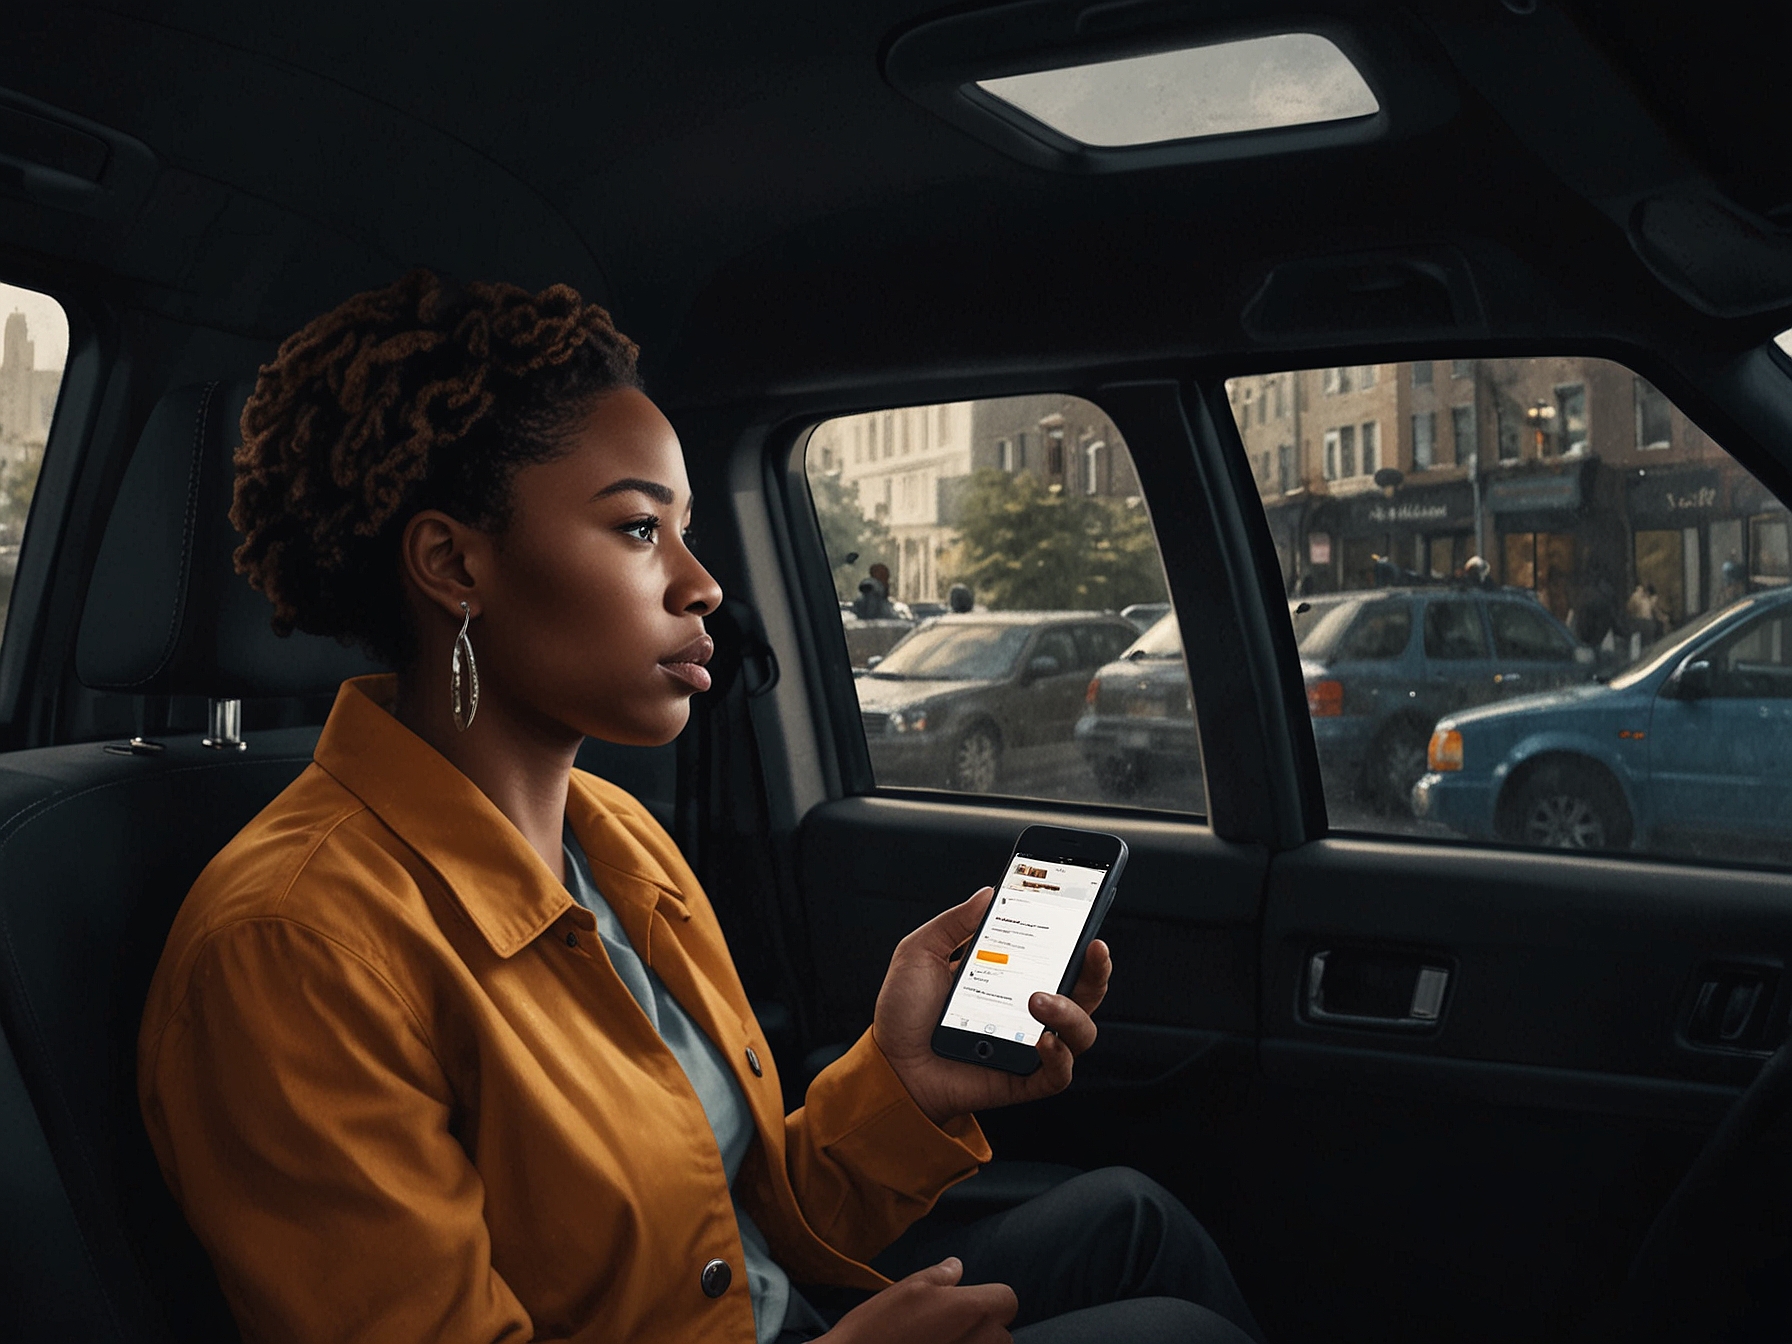 An illustration depicting a person of color facing a ride-share cancellation, highlighting racial discrimination in everyday experiences. The image reflects the article's discussion on media portrayal of such incidents.